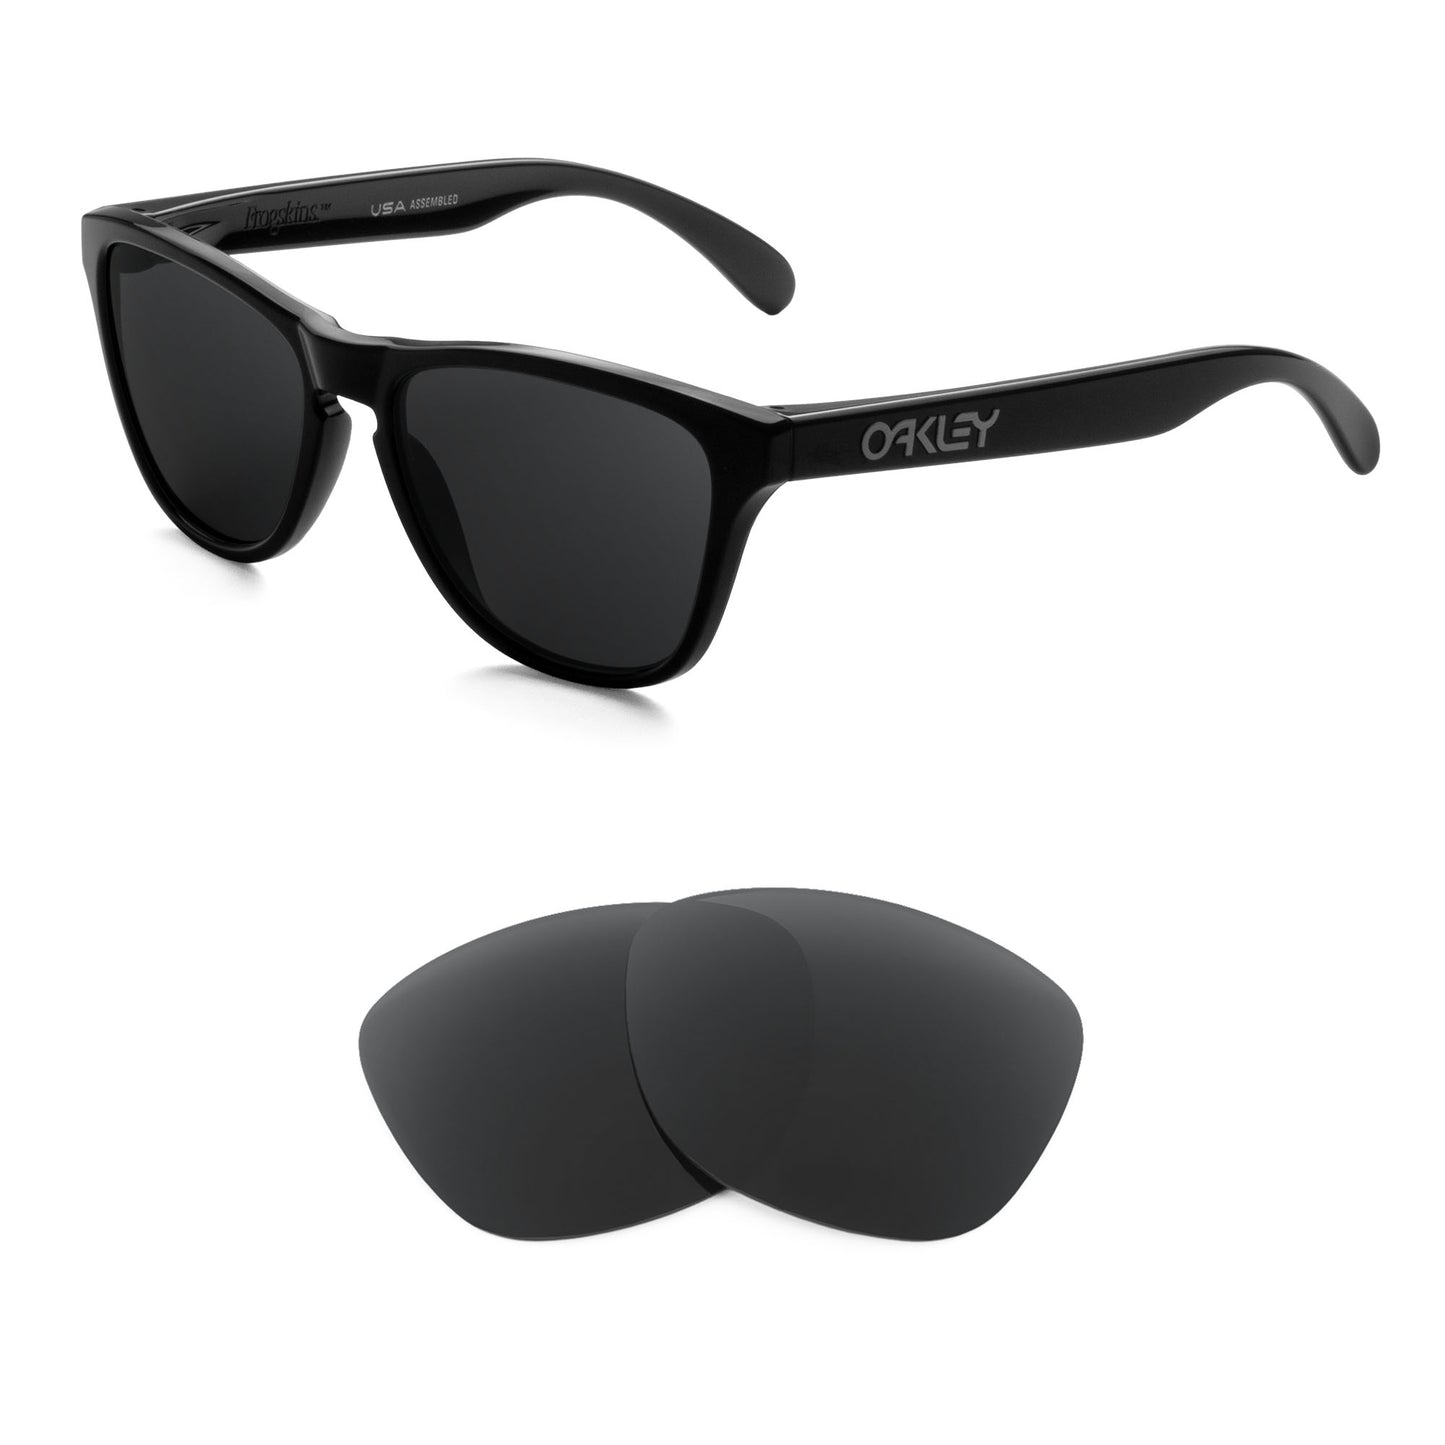 Oakley Frogskins XS sunglasses with replacement lenses